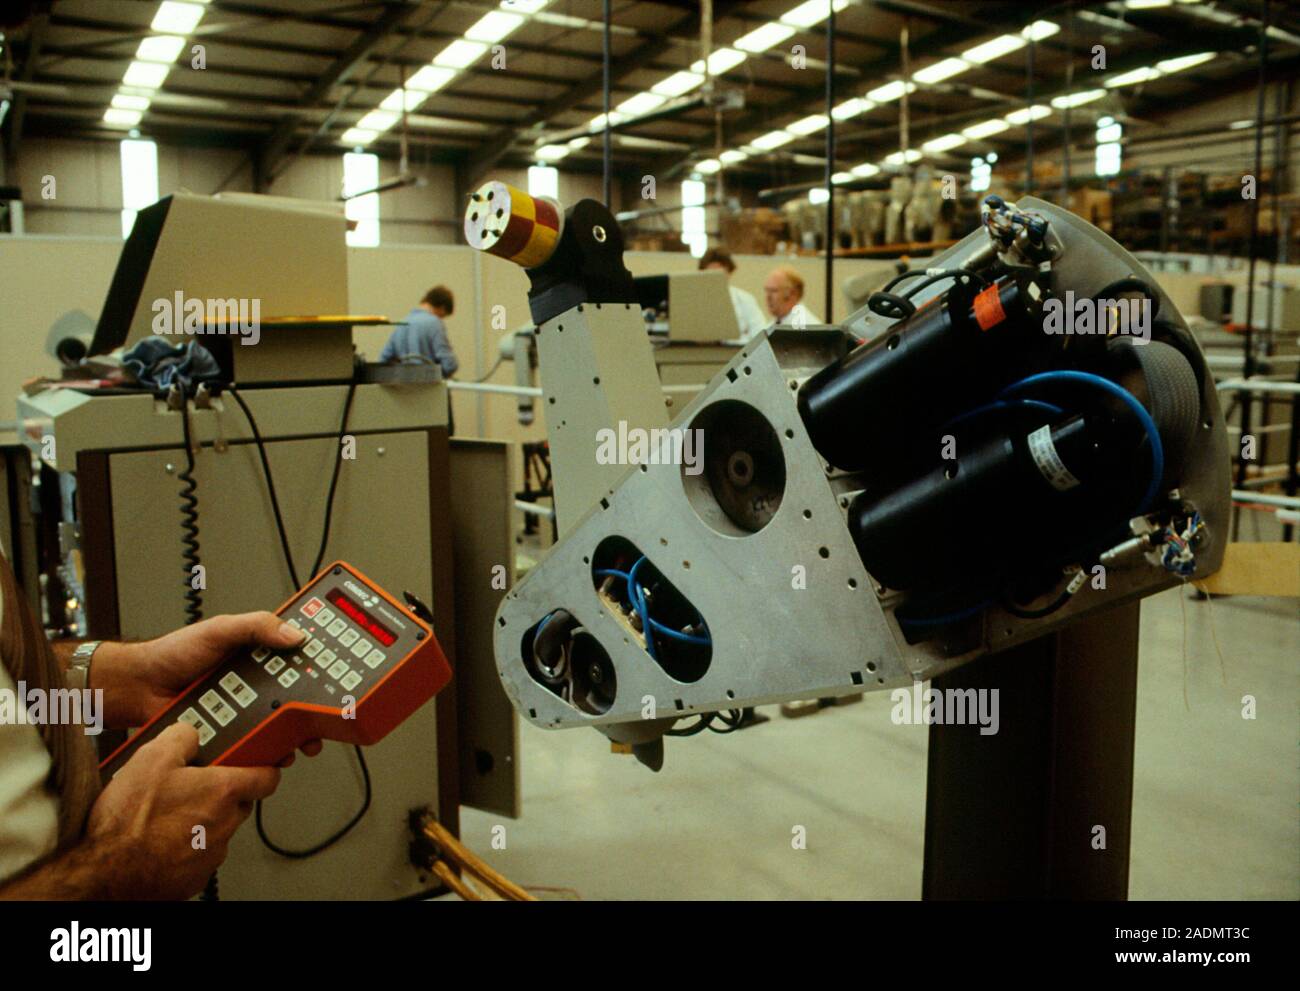 Unimation robot factory, Telford, UK, showing the testing of the Puma robot  Stock Photo - Alamy